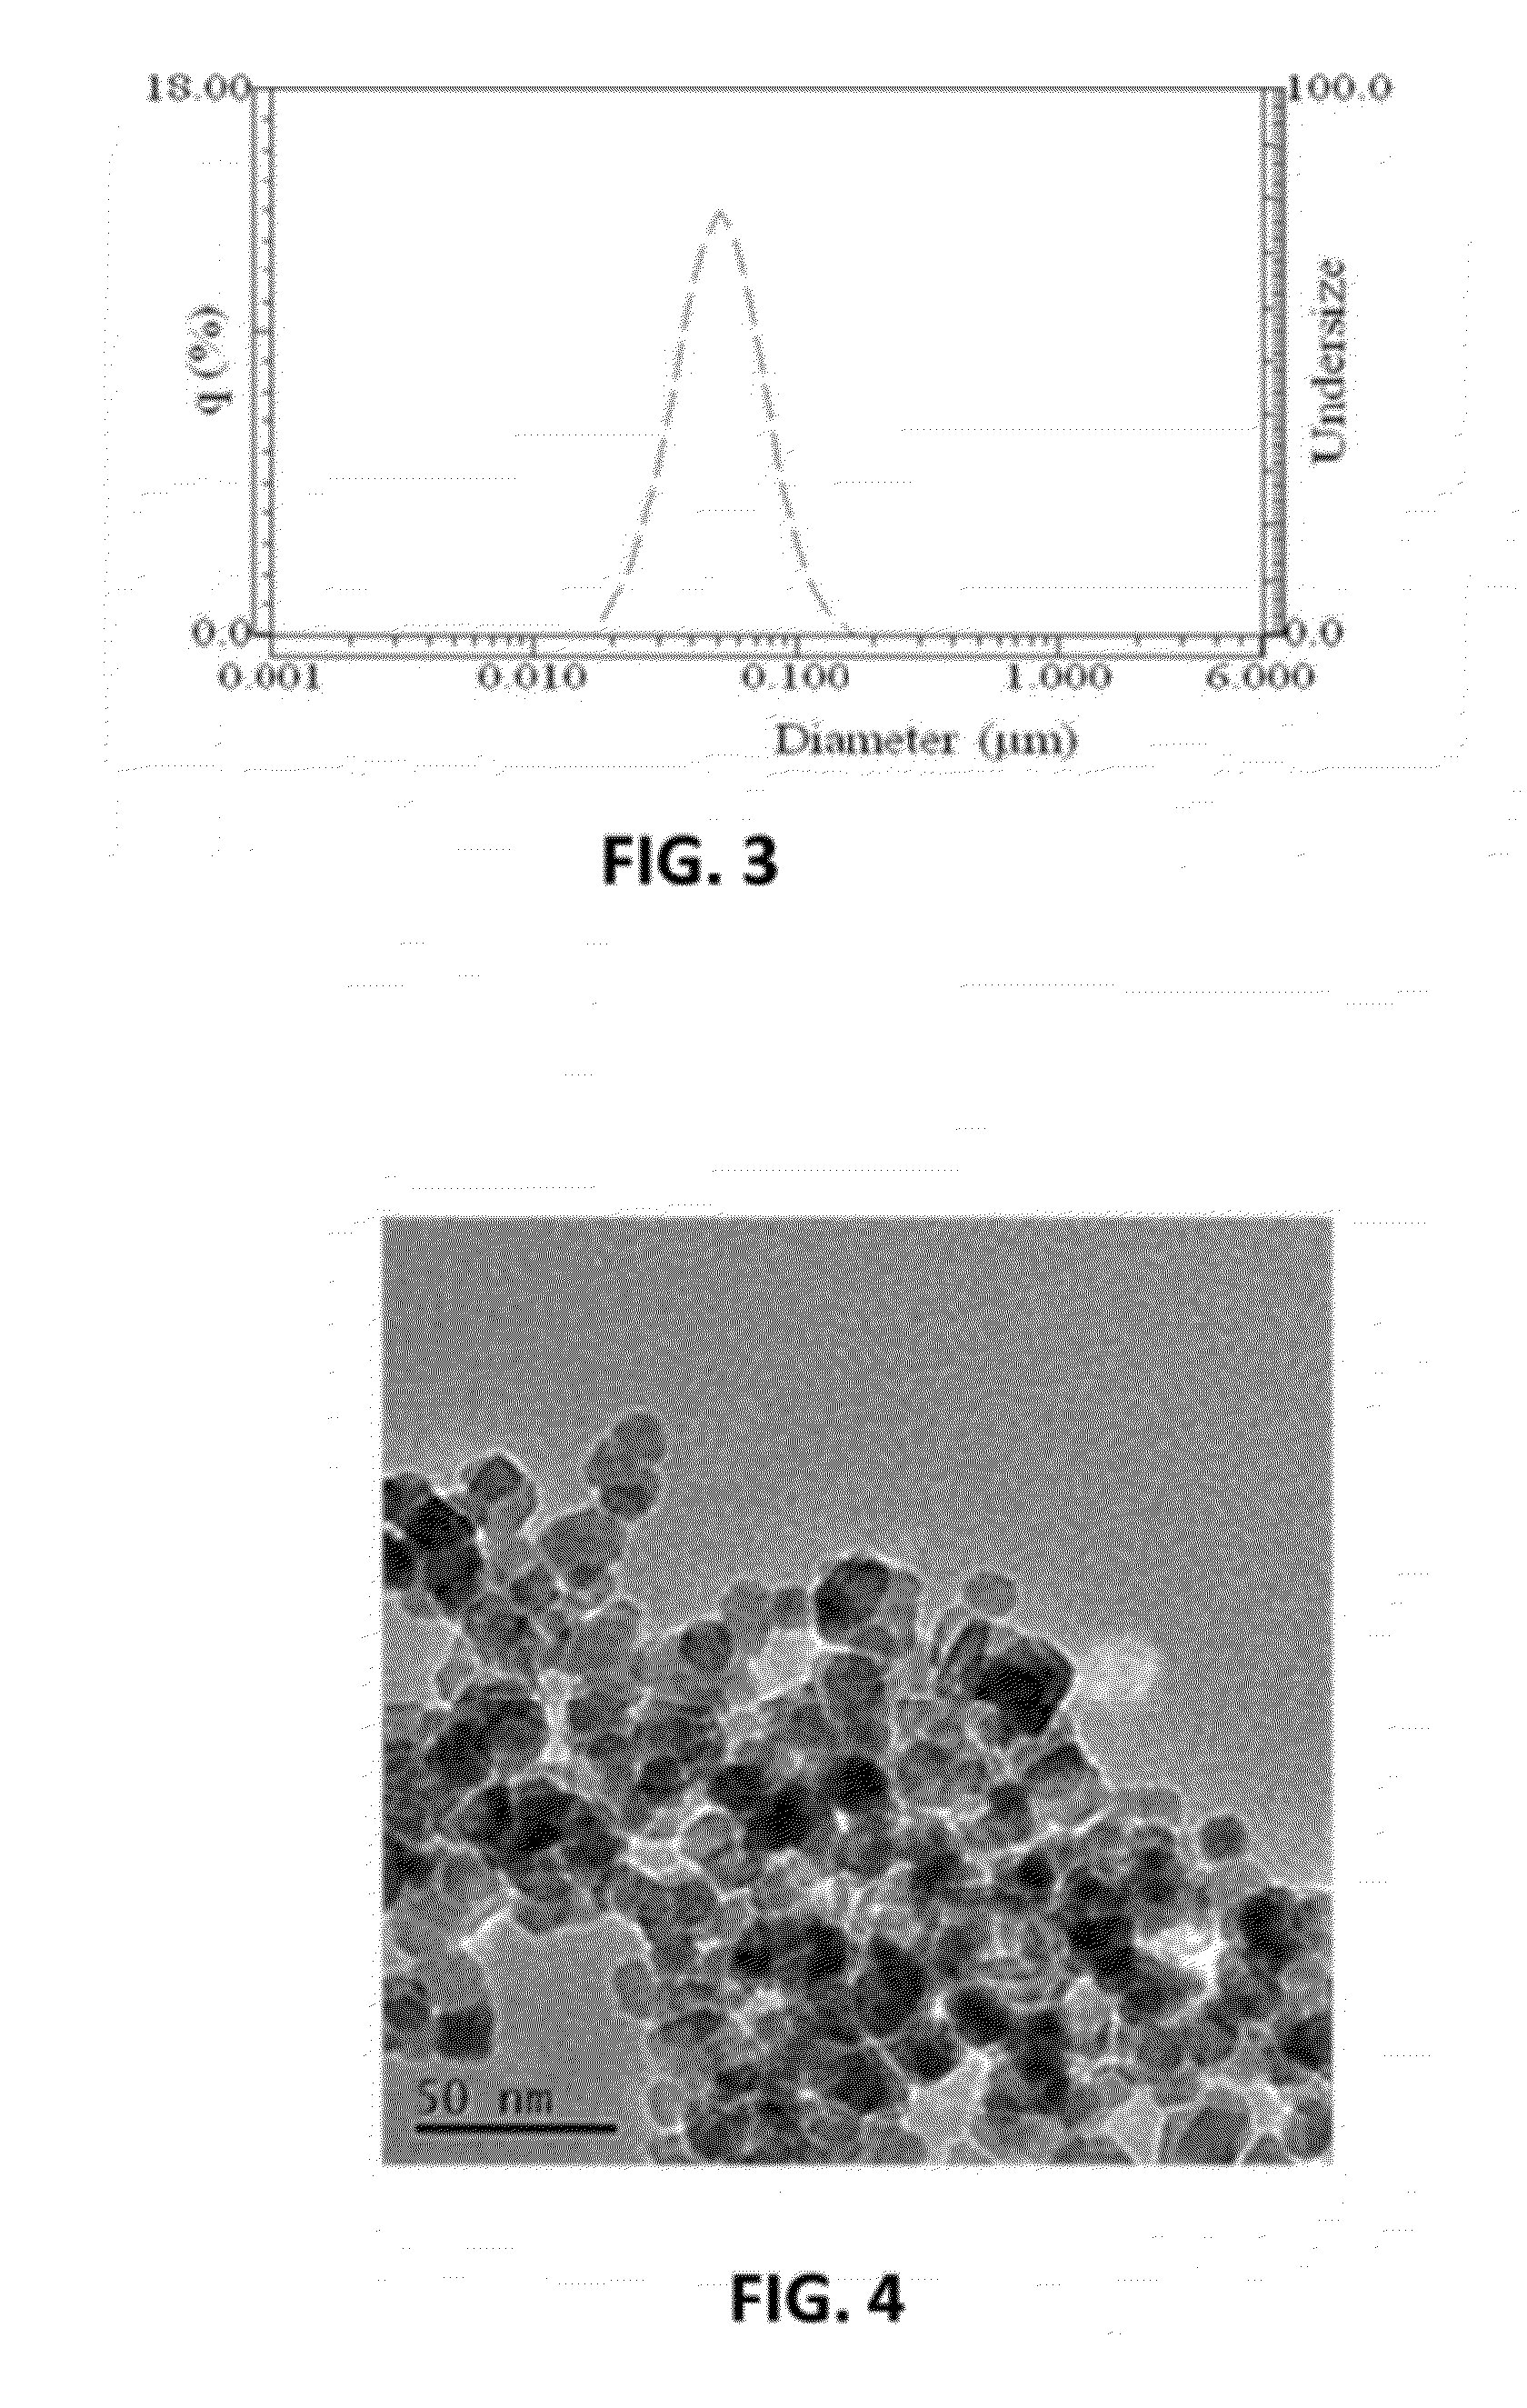 Formulation and Methods for Enhanced Interventional Image-Guided Therapy of Cancer